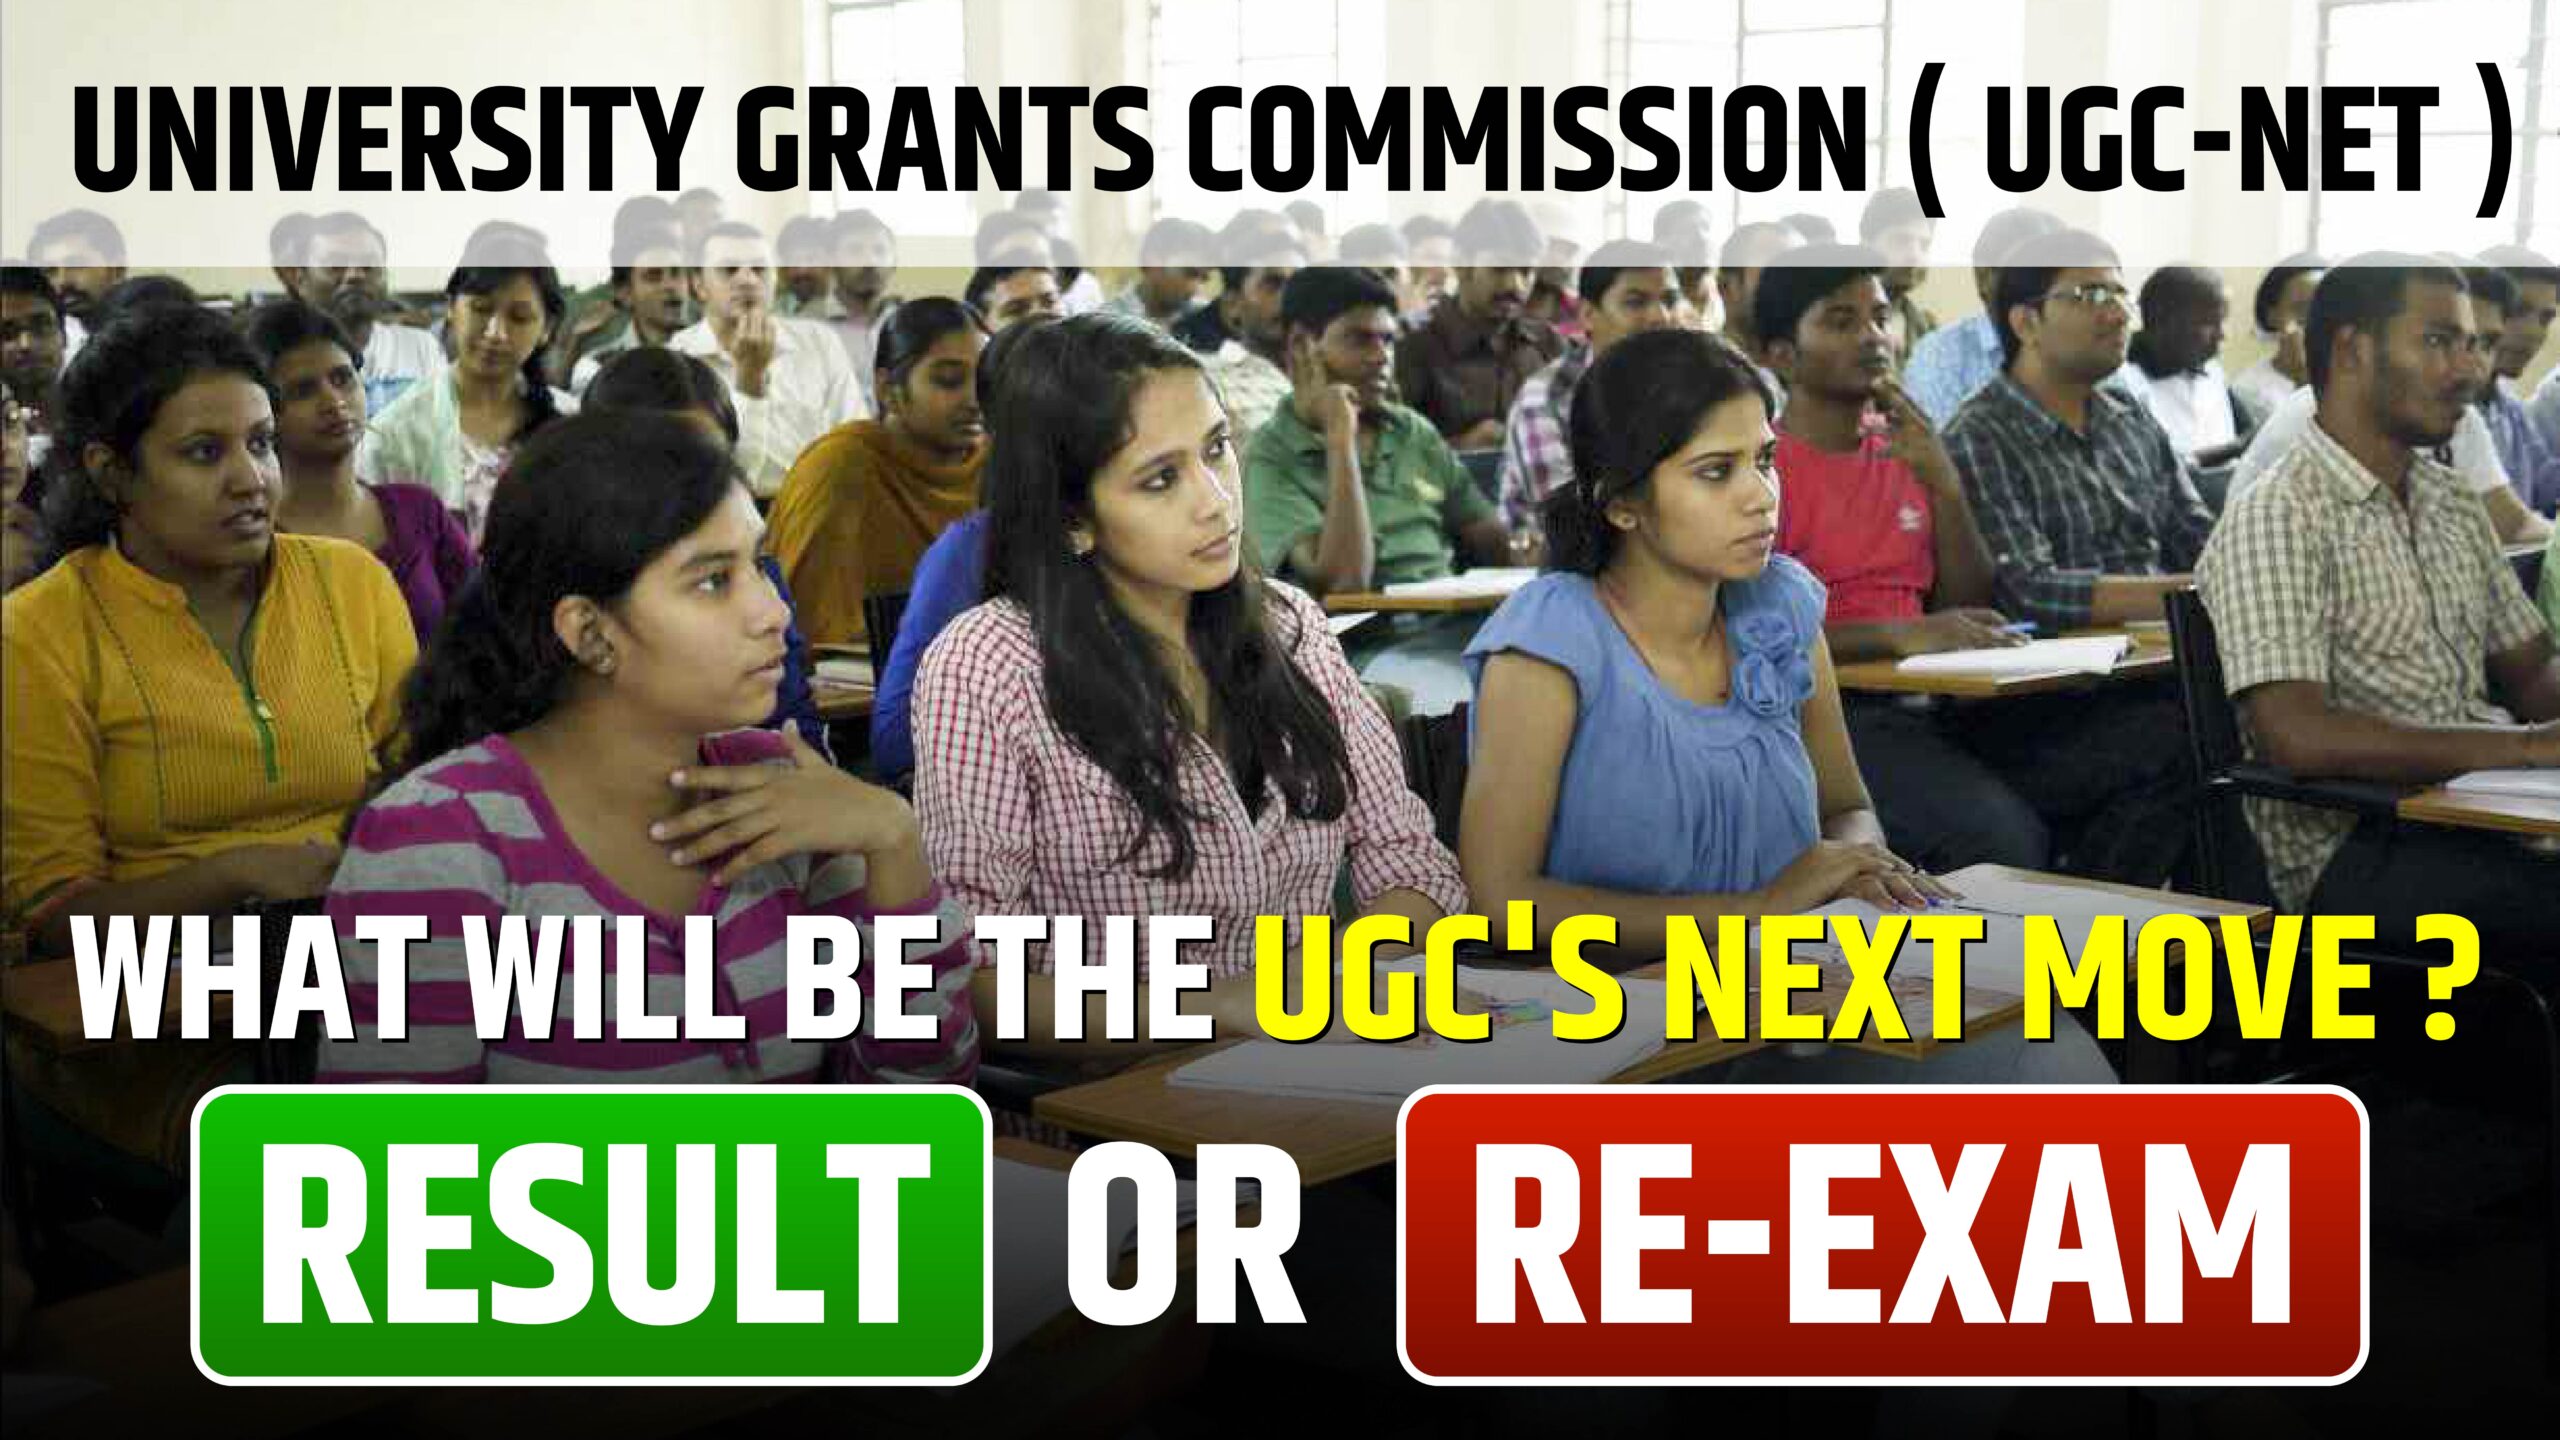 WHAT WILL BE THE UGC’S NEXT MOVE: RESULT OR RE-EXAM?